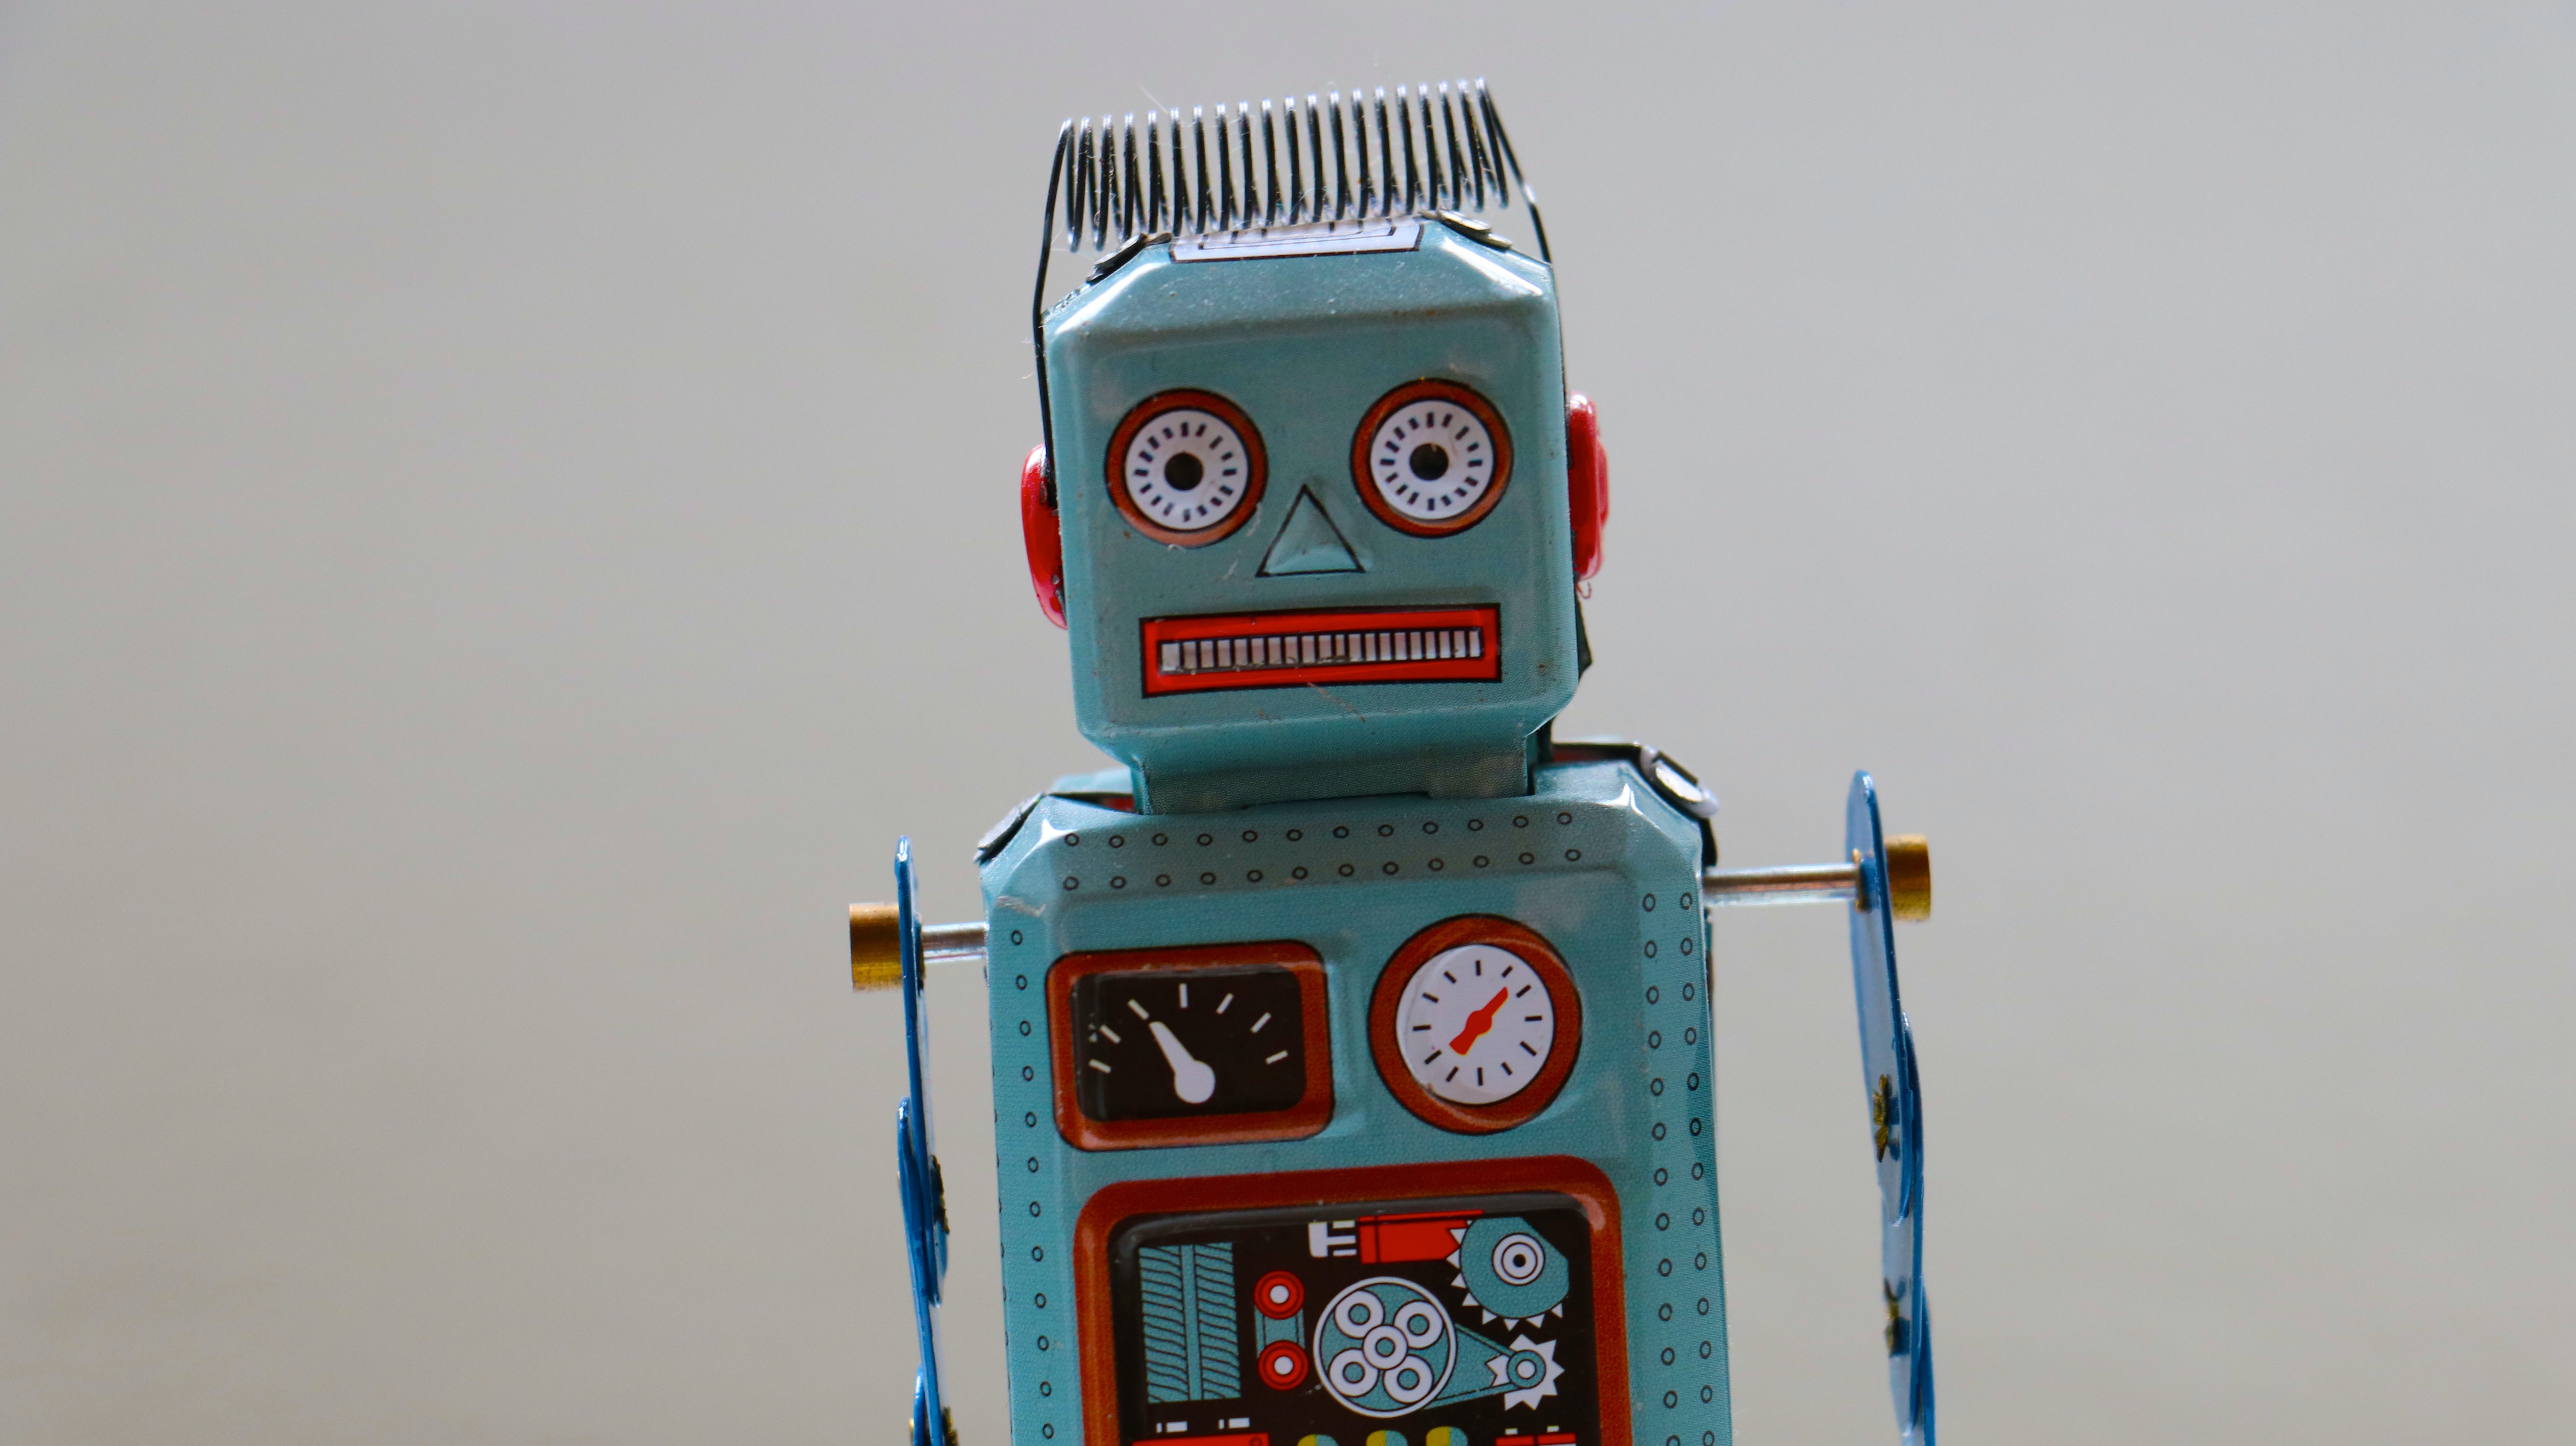 Vintage tin robot toy on a white background exemplifying functional programming principles in Python, symbolizing the automation and precision of code.